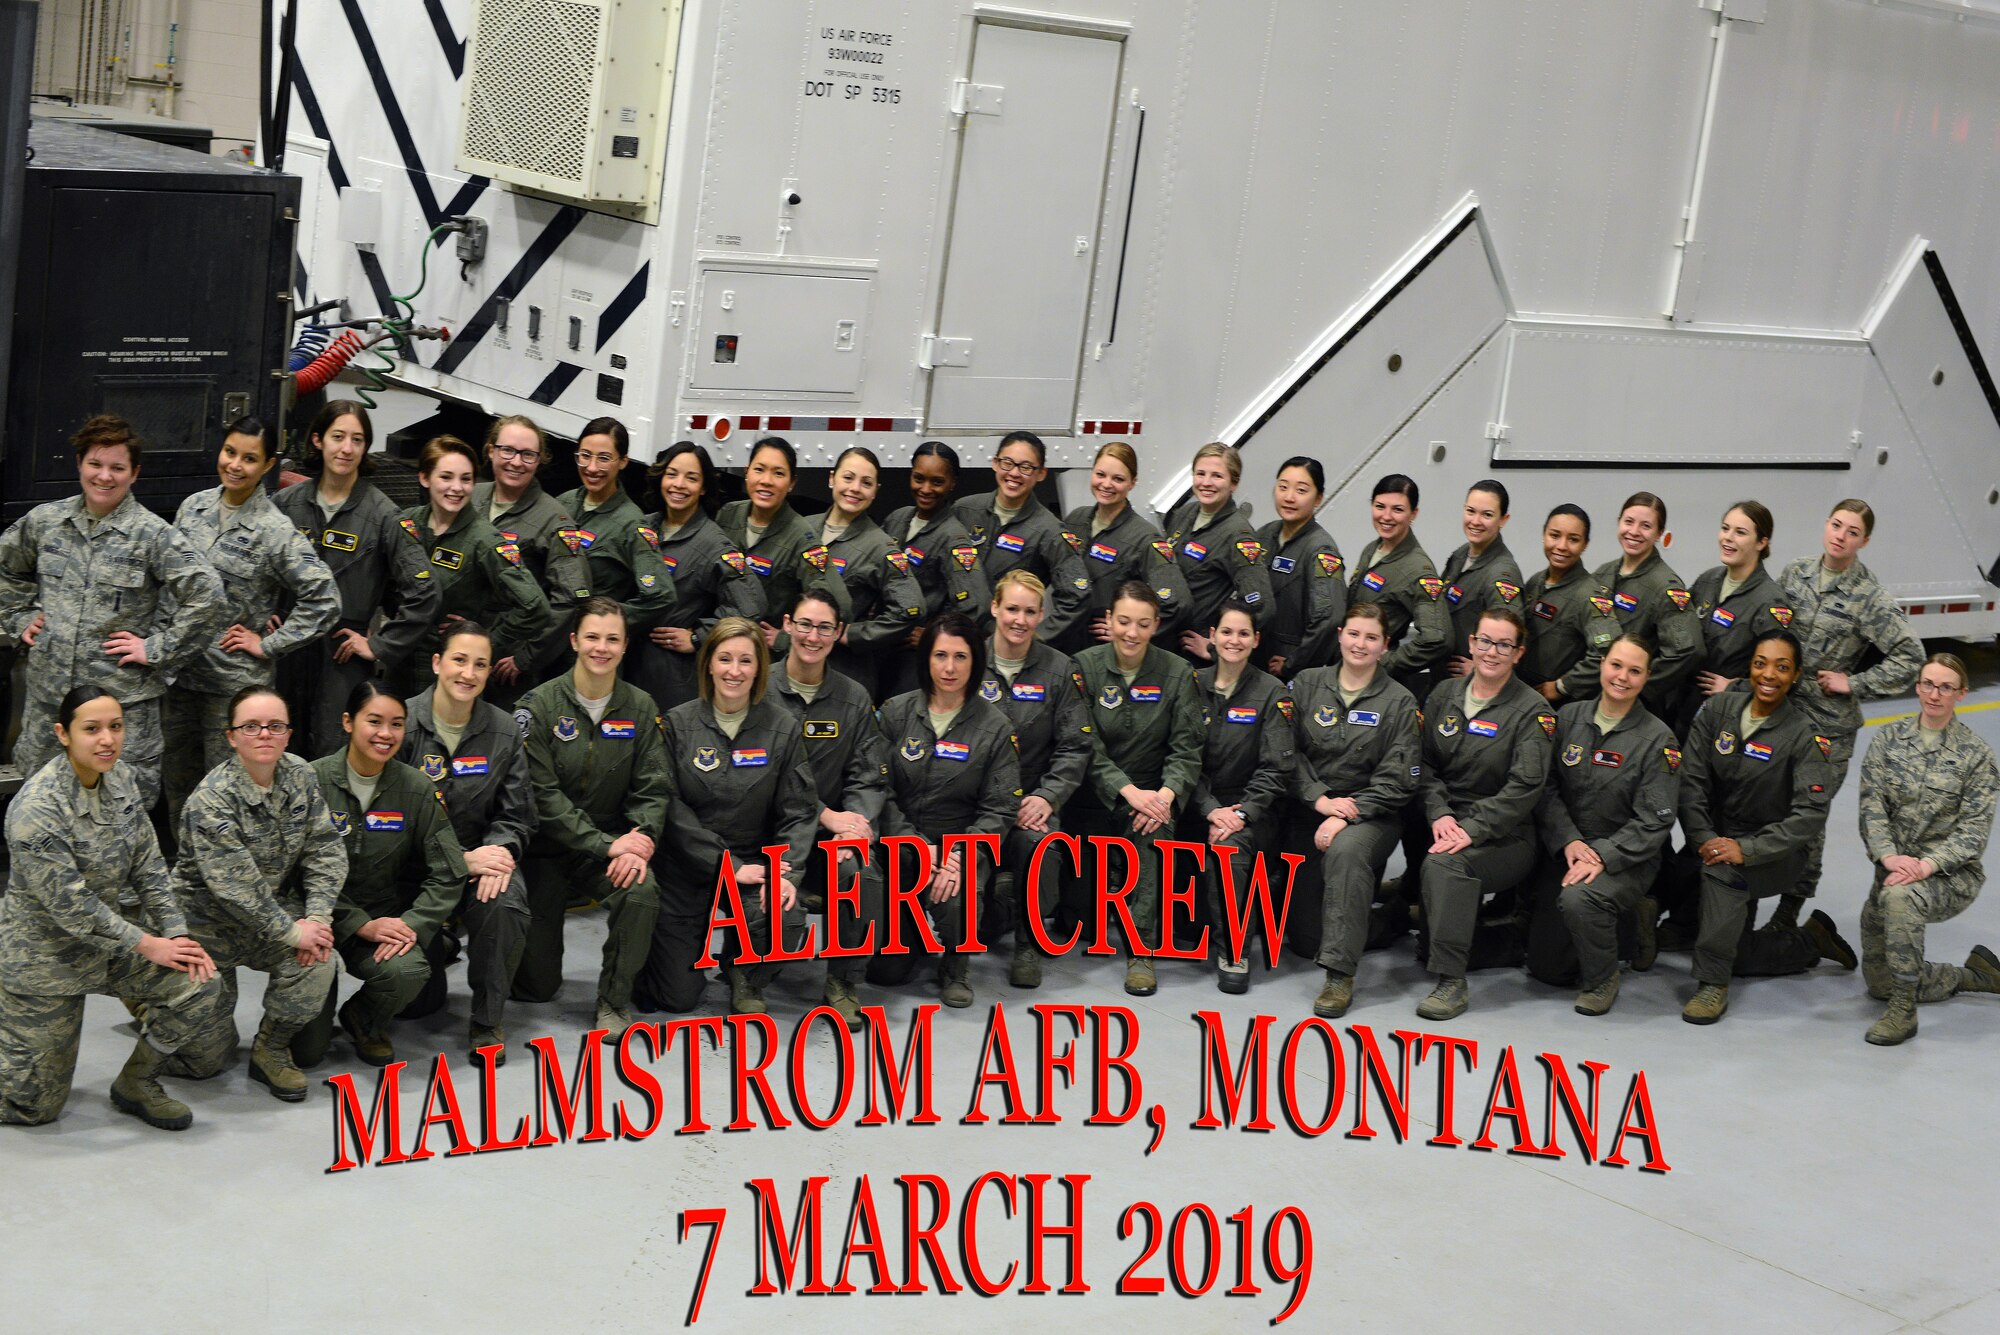 Members of the 2019 all-female alert crew pose for a group photo March 7, 2019, at Malmstrom Air Force Base, Mont.